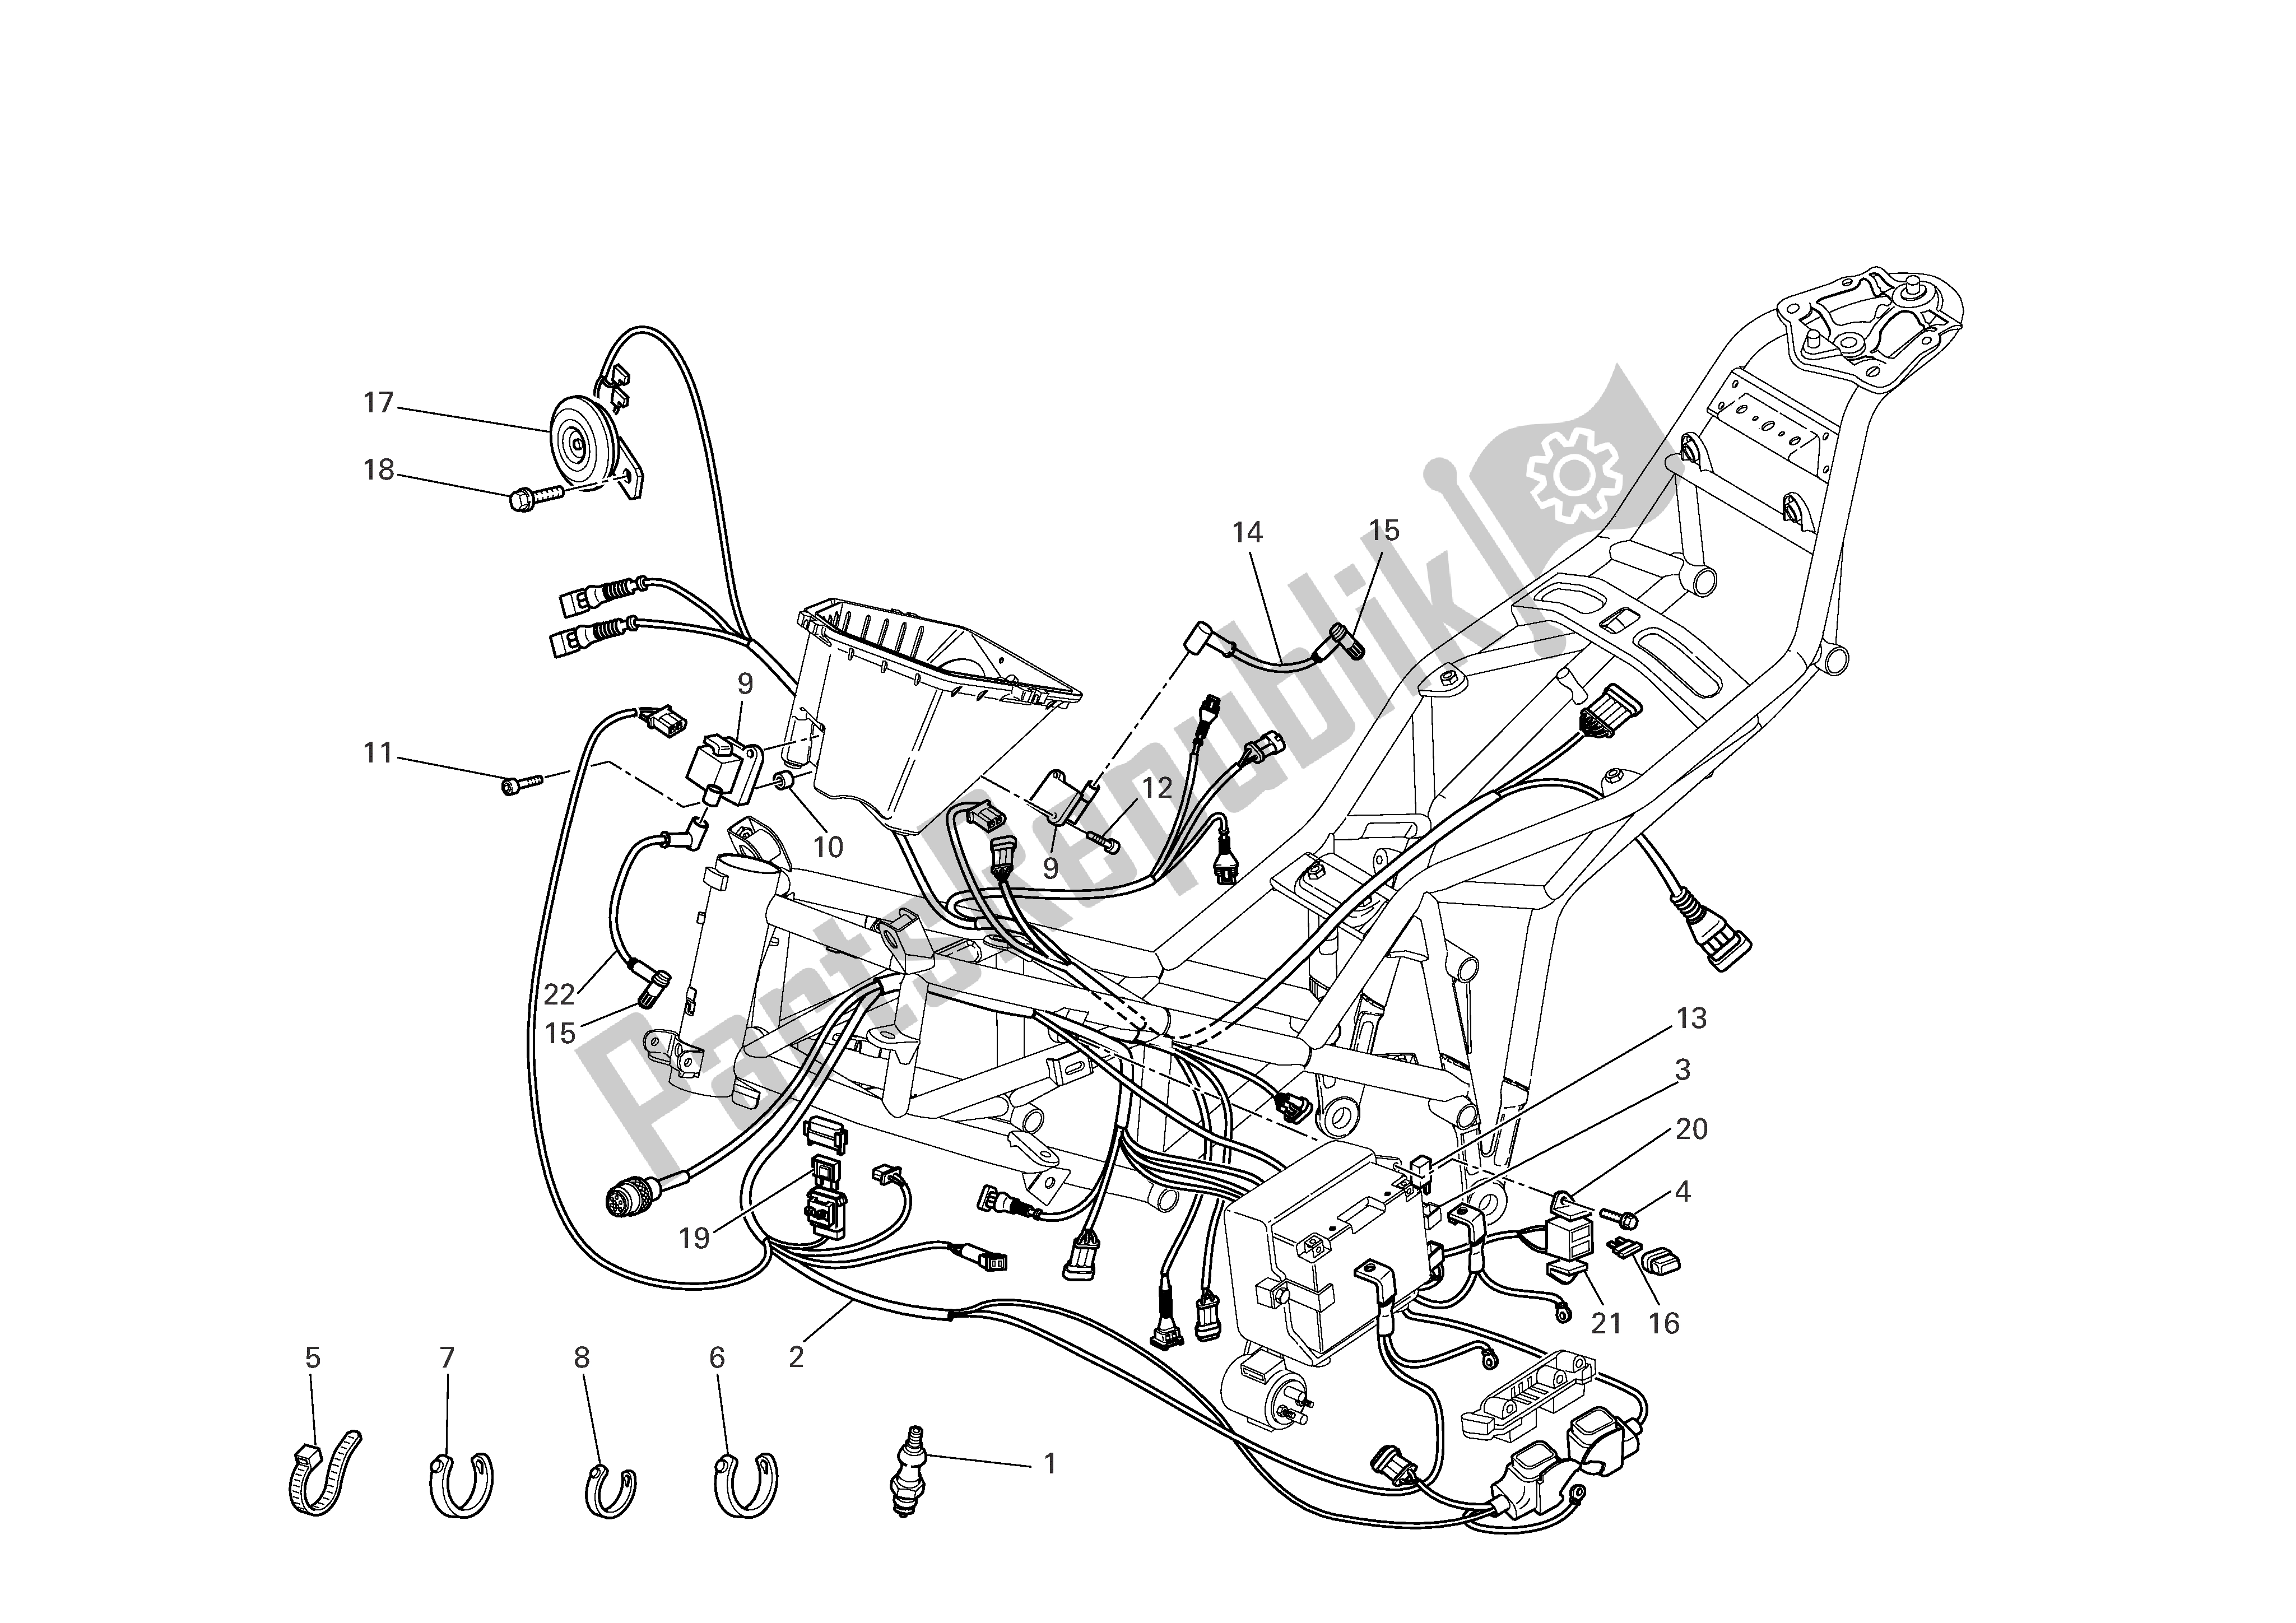 All parts for the Electrical System of the Ducati Multistrada 620 2006